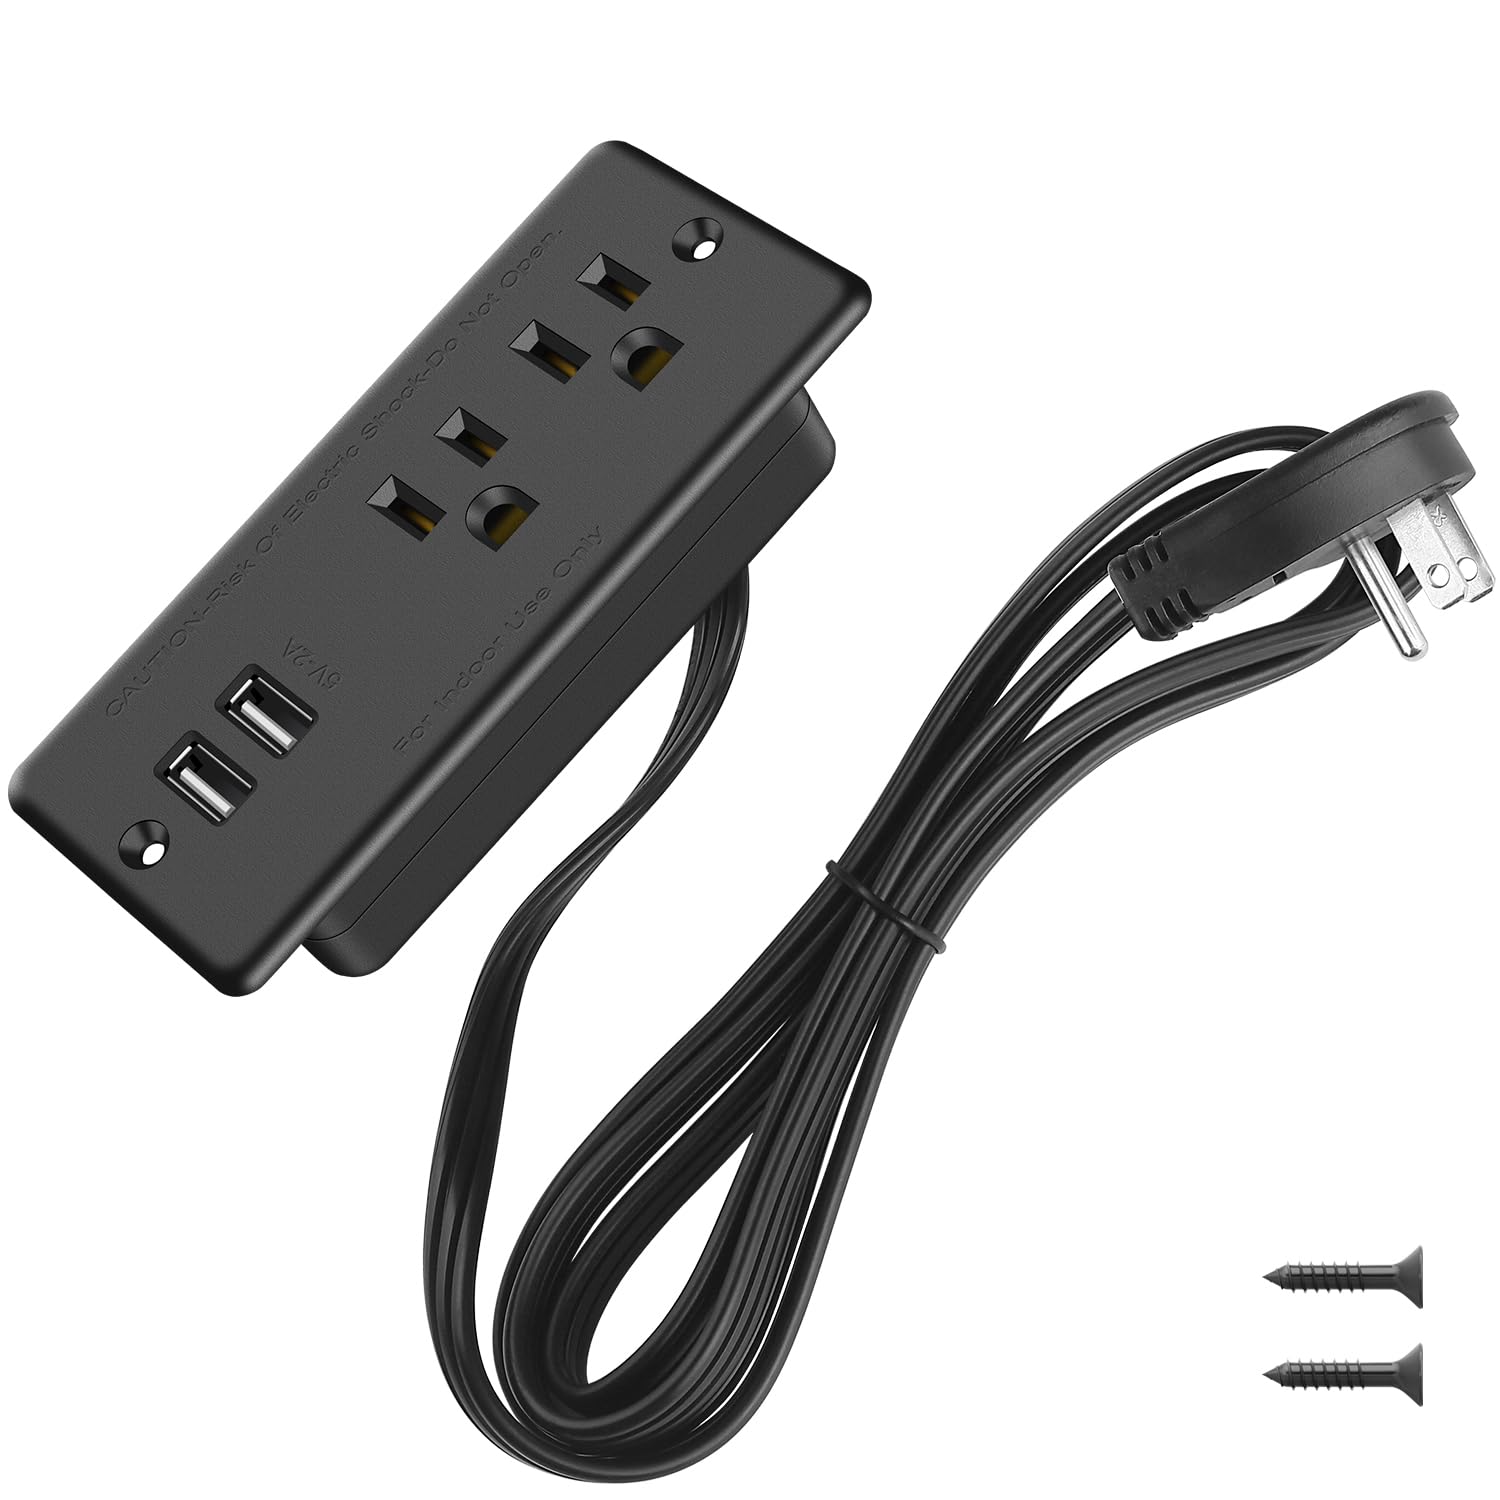 Power cord and outlet socket